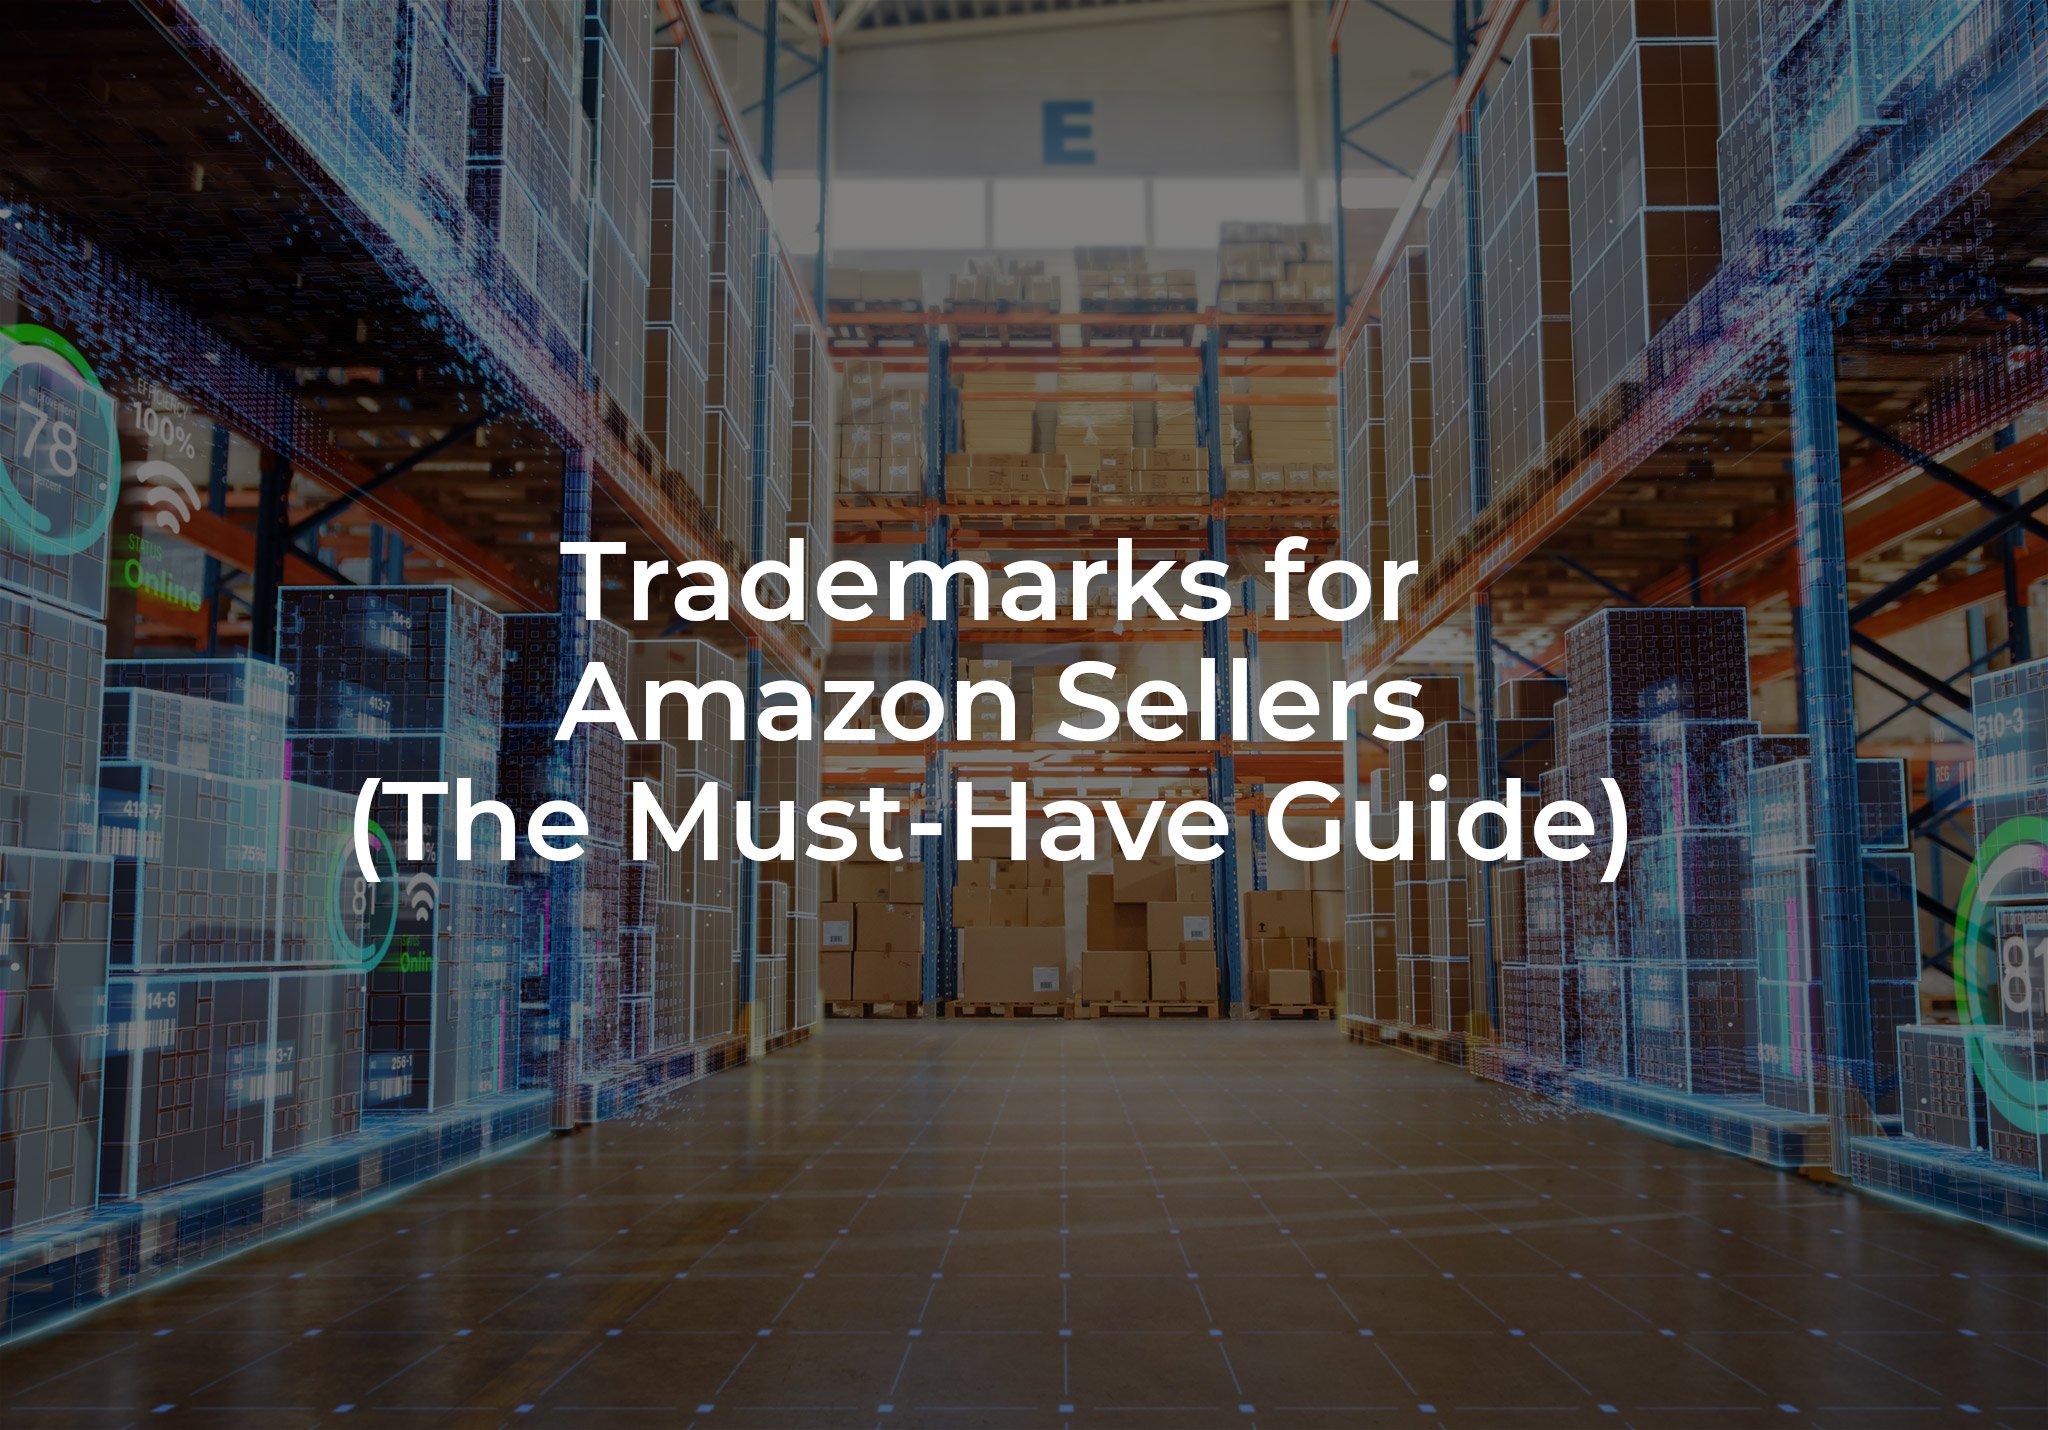 Trademarks for Amazon Sellers (The Must-Have Guide)